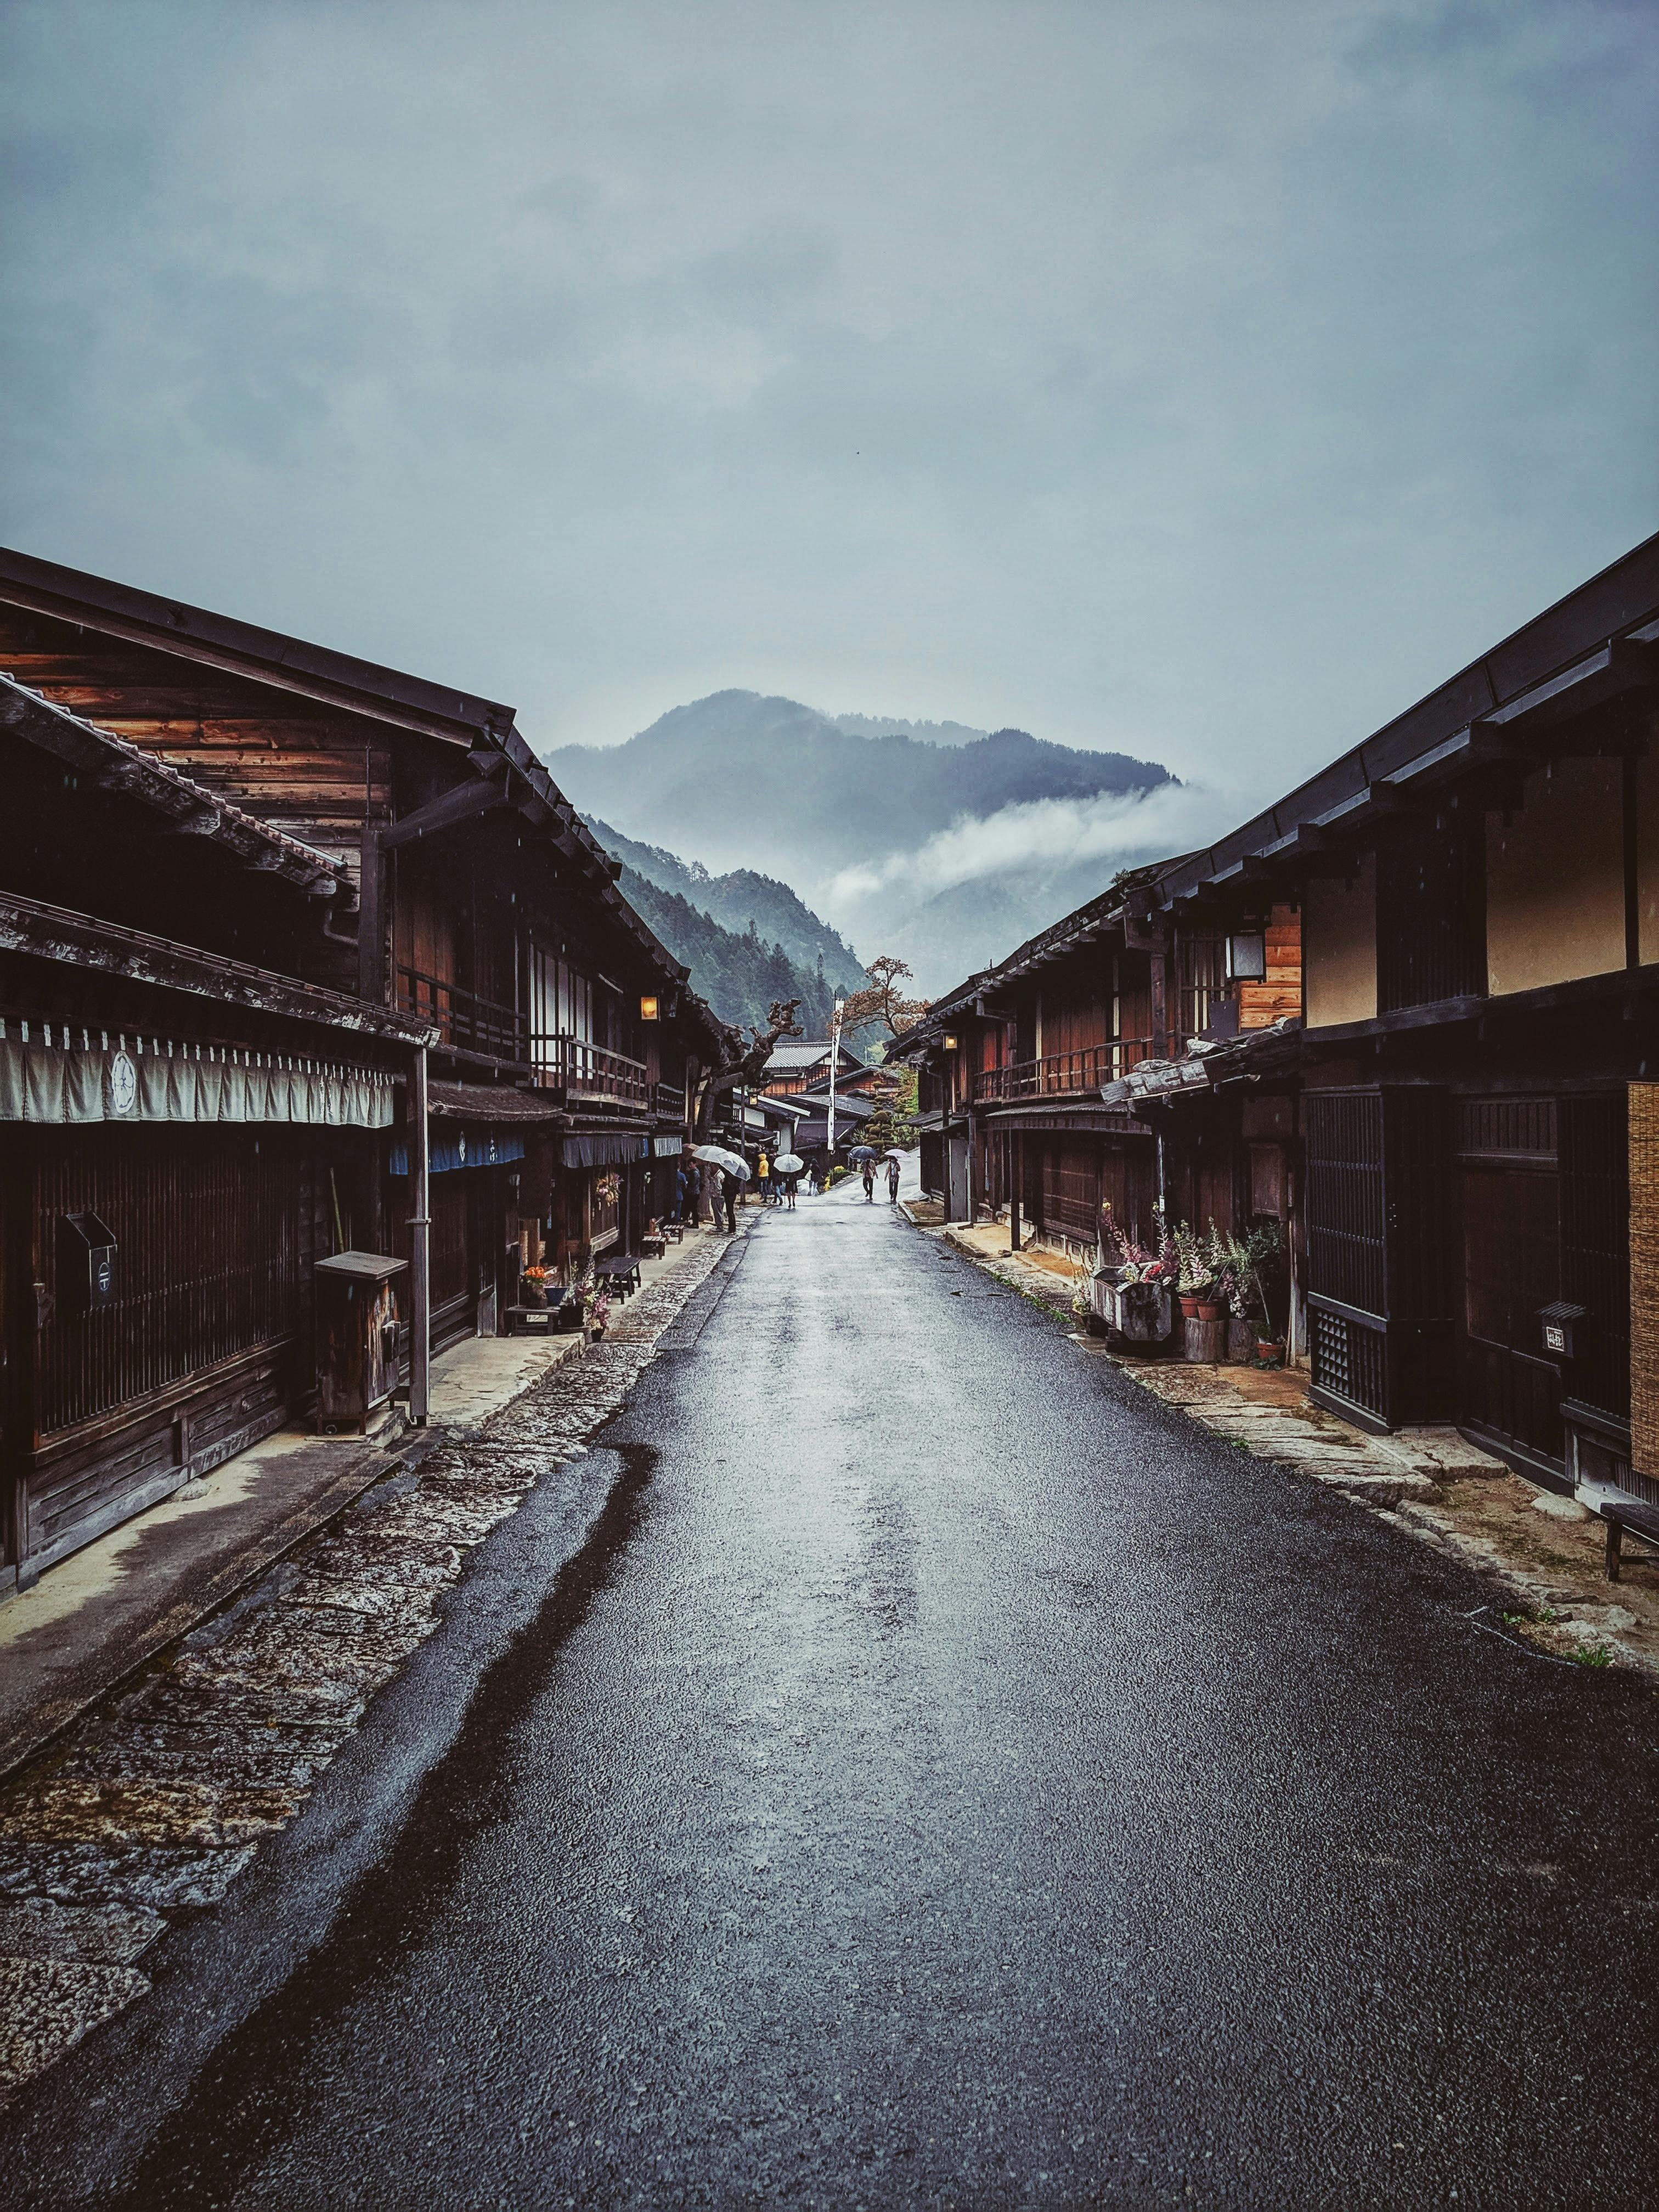 The main street of a post-town along the Nakasendō trail in Japan